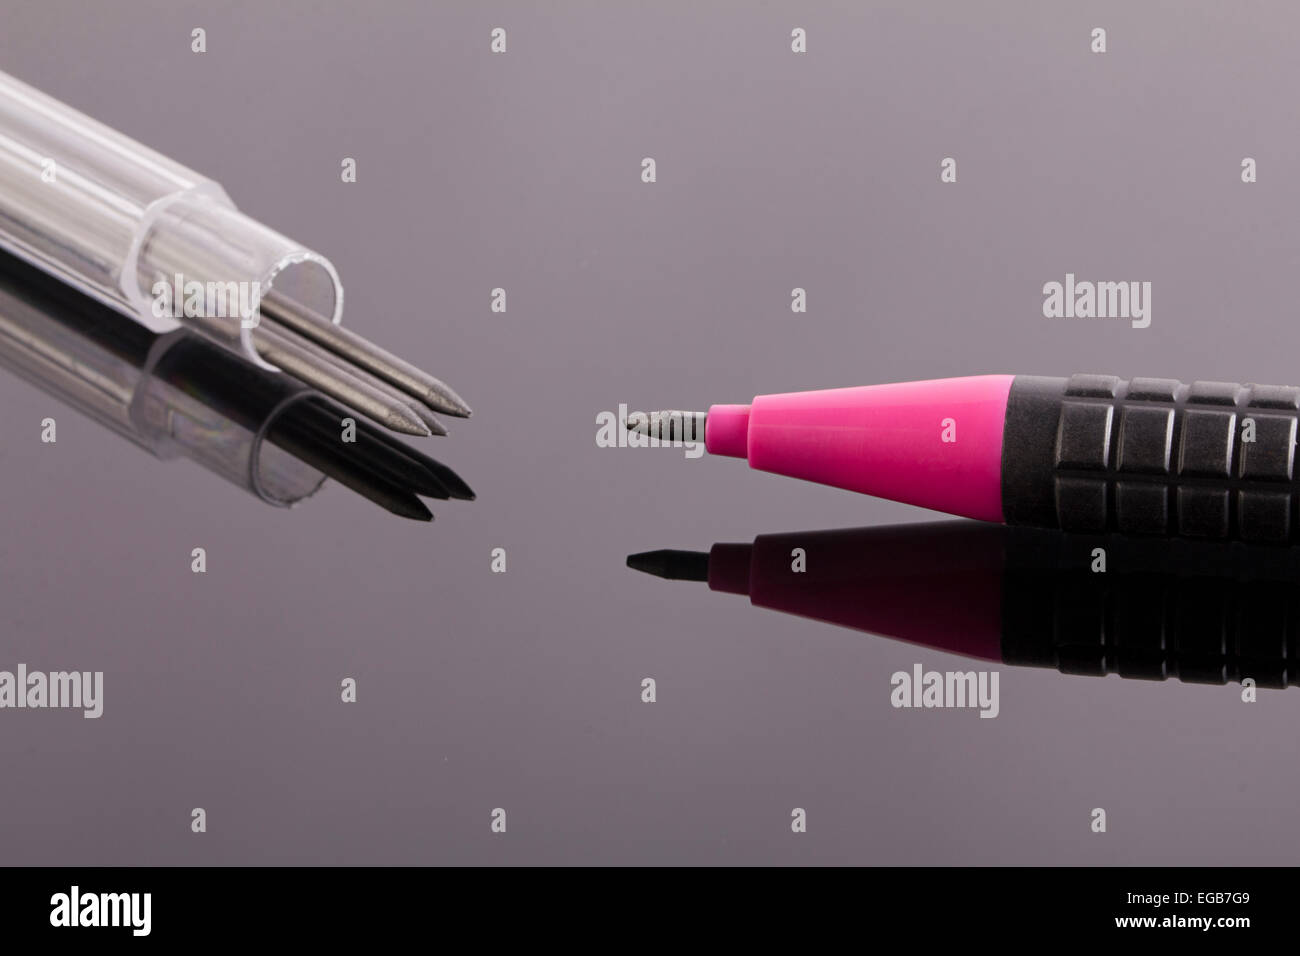 Stationary Pencil and Pencil Tip Stick Education Nobody Stock Photo